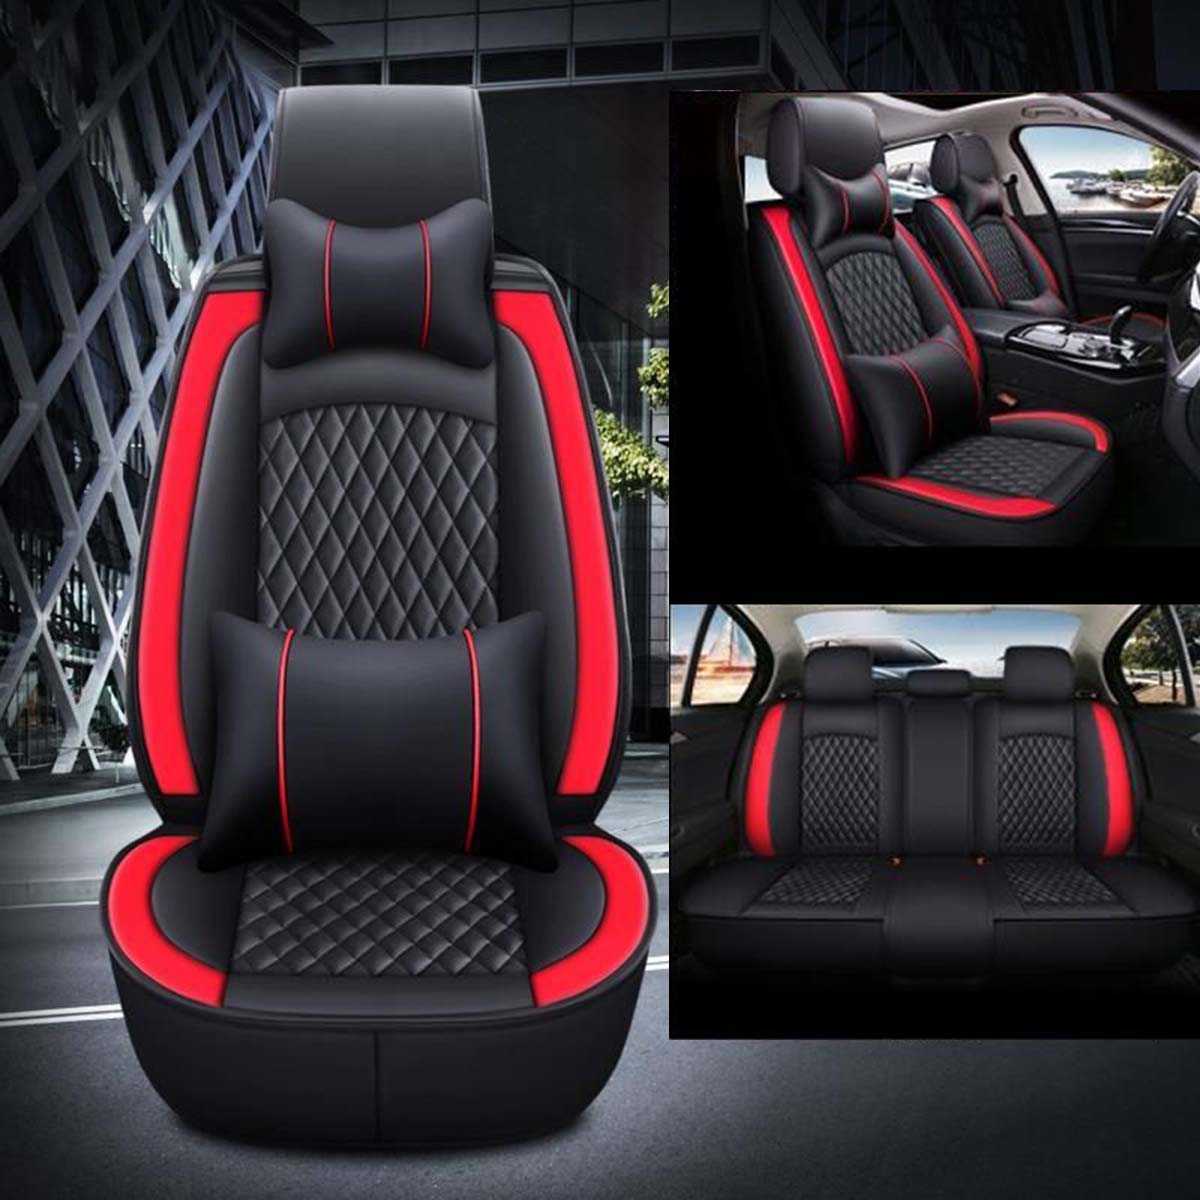 2 Car Seat Covers Full Set, Custom-Fit For Car, Waterproof Leather Front Rear Seat Automotive Protection Cushions, Car Accessories DLRL211